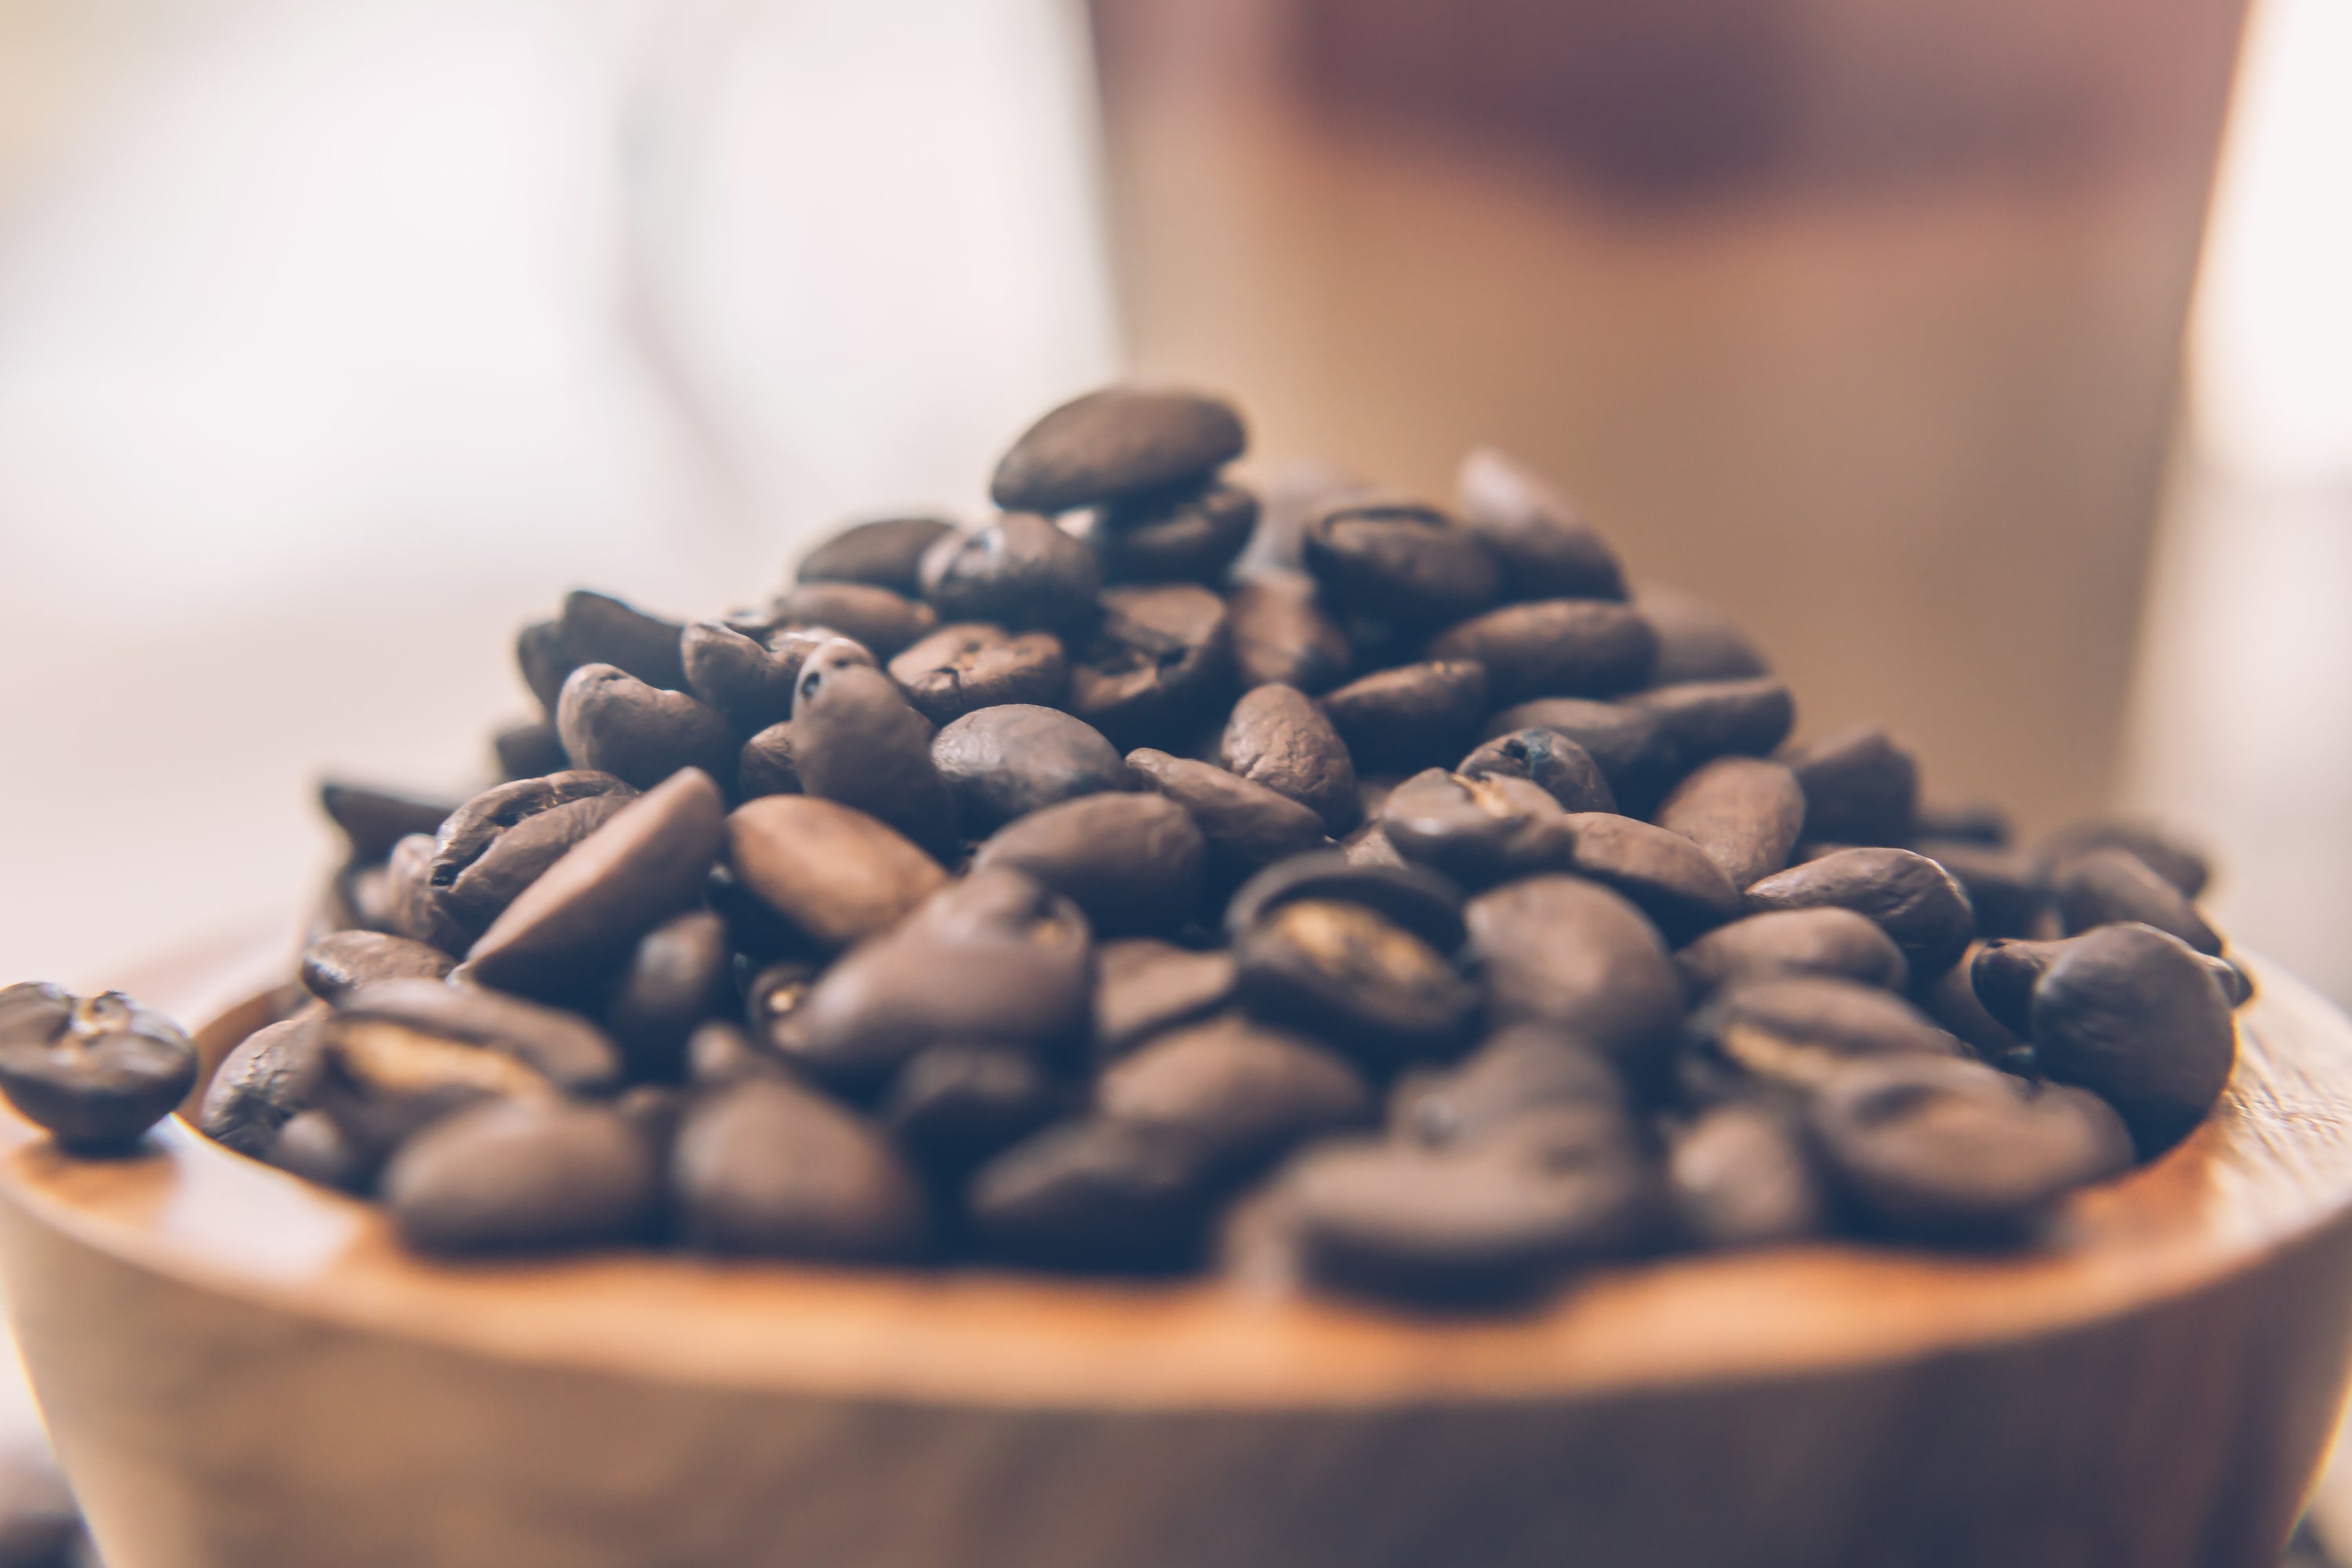 Coffee beans in a wooden bowl